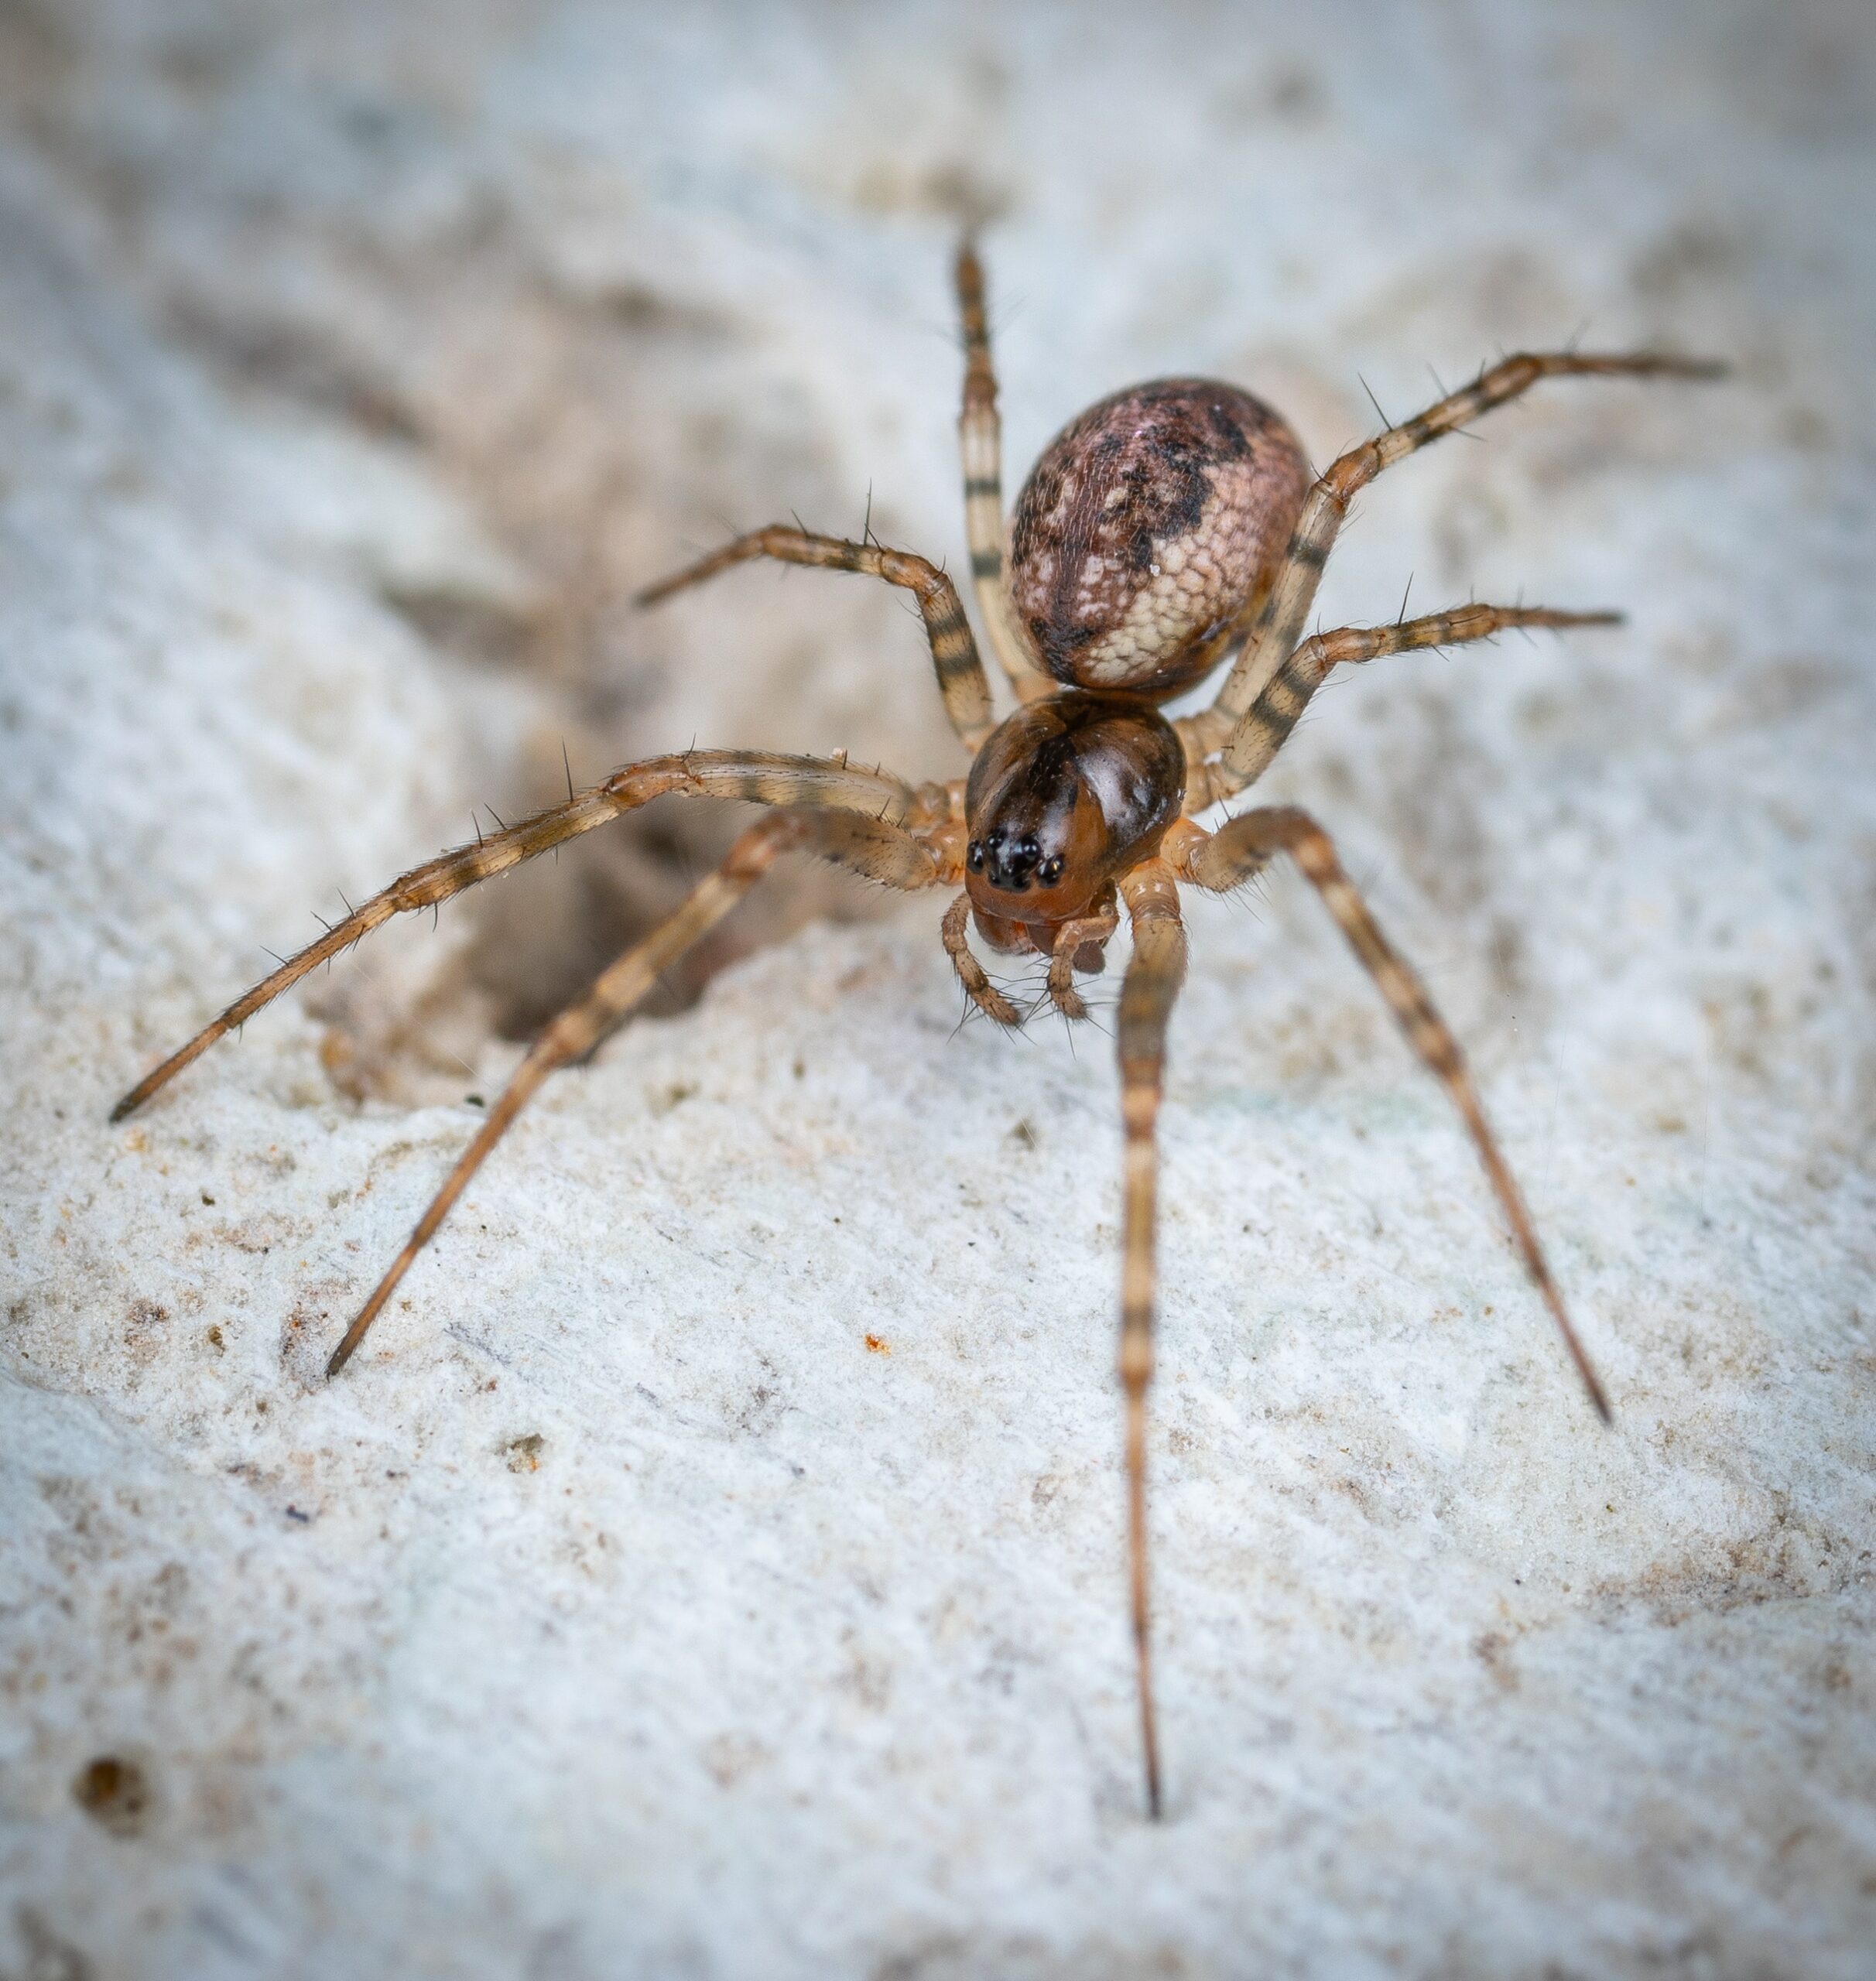 How to Identify and Treat a Brown Recluse Spider Bite